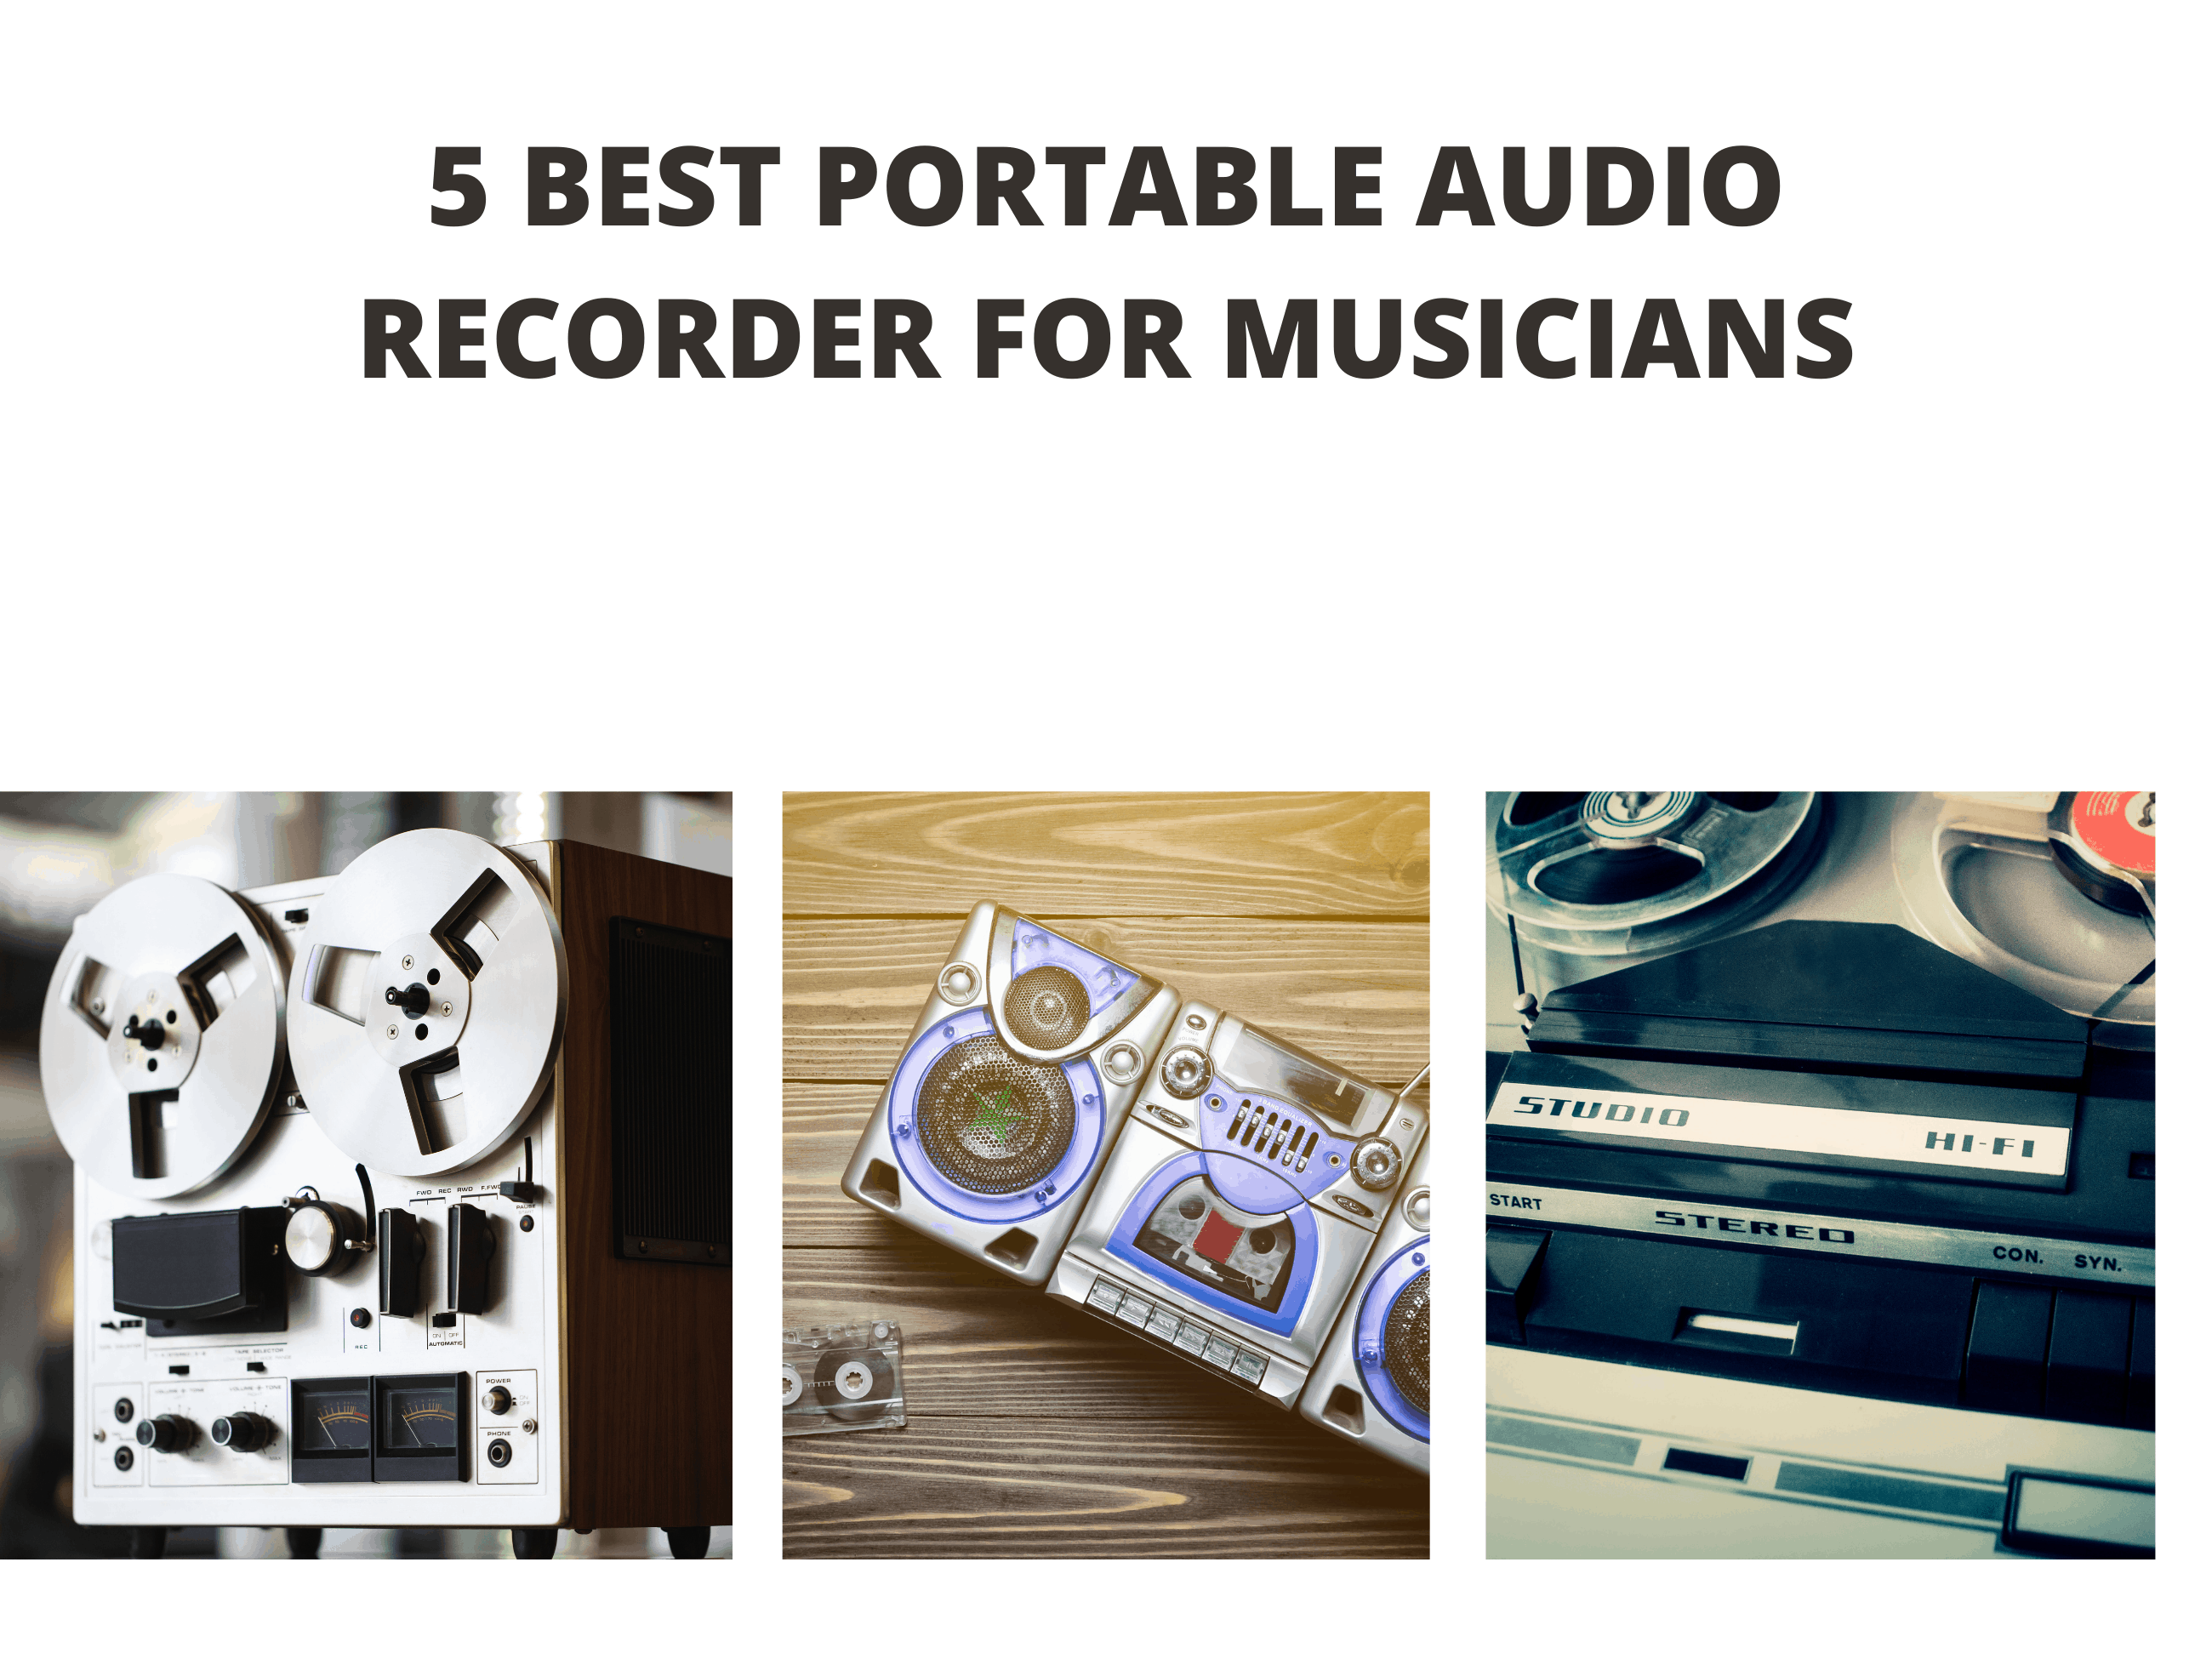 5 Best Portable Audio Recorder for Musicians